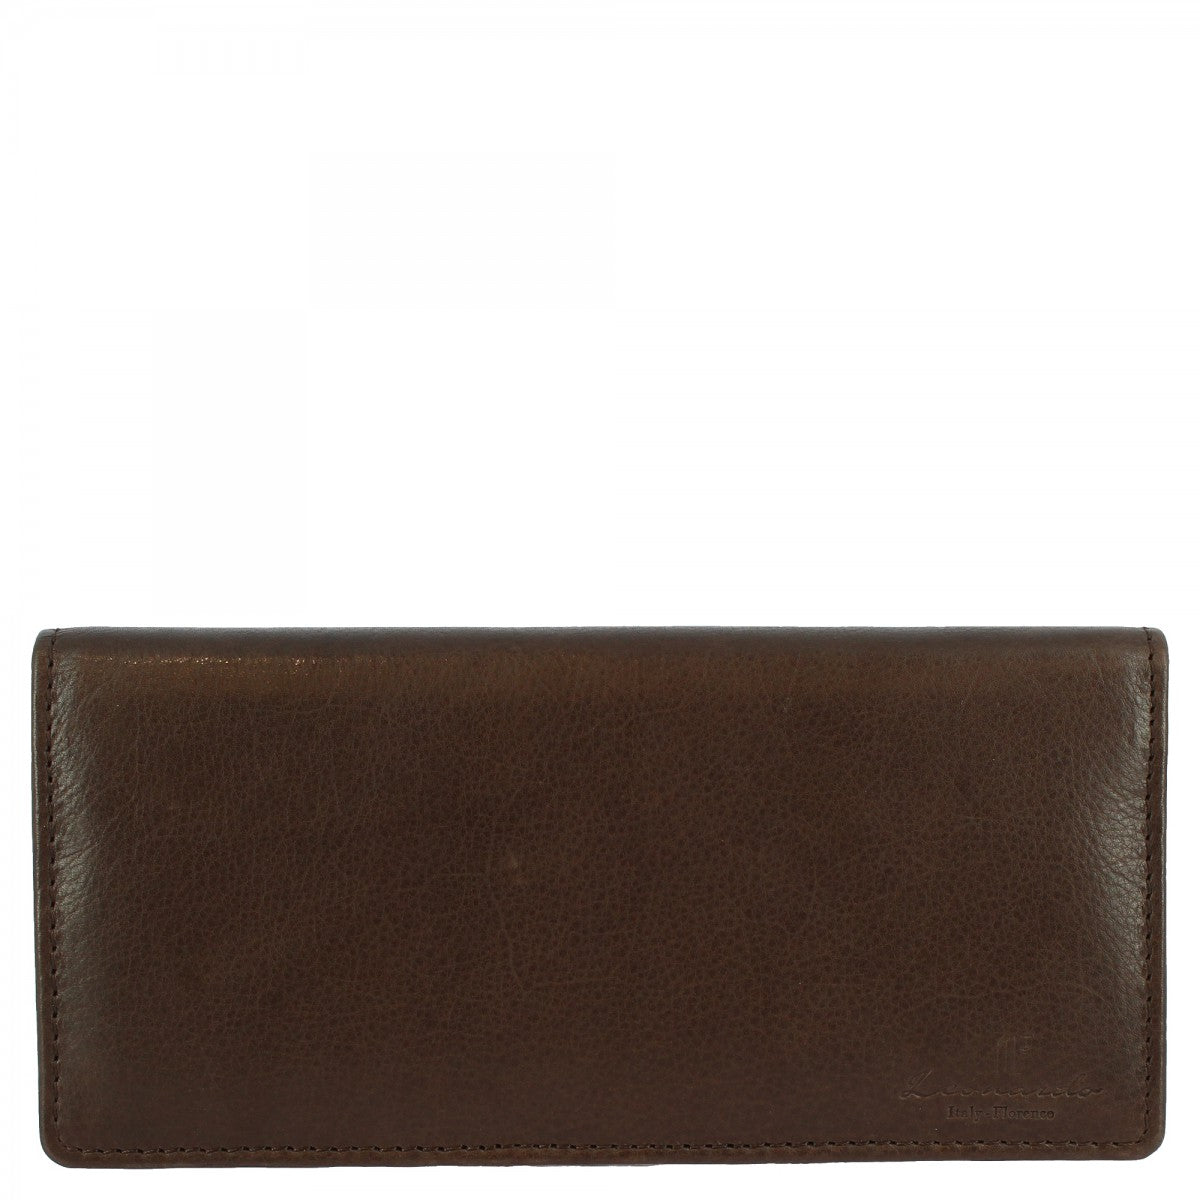 Women's Wallet Made of Nappa Leather for Banknotes and Credit Cards in Various Colors